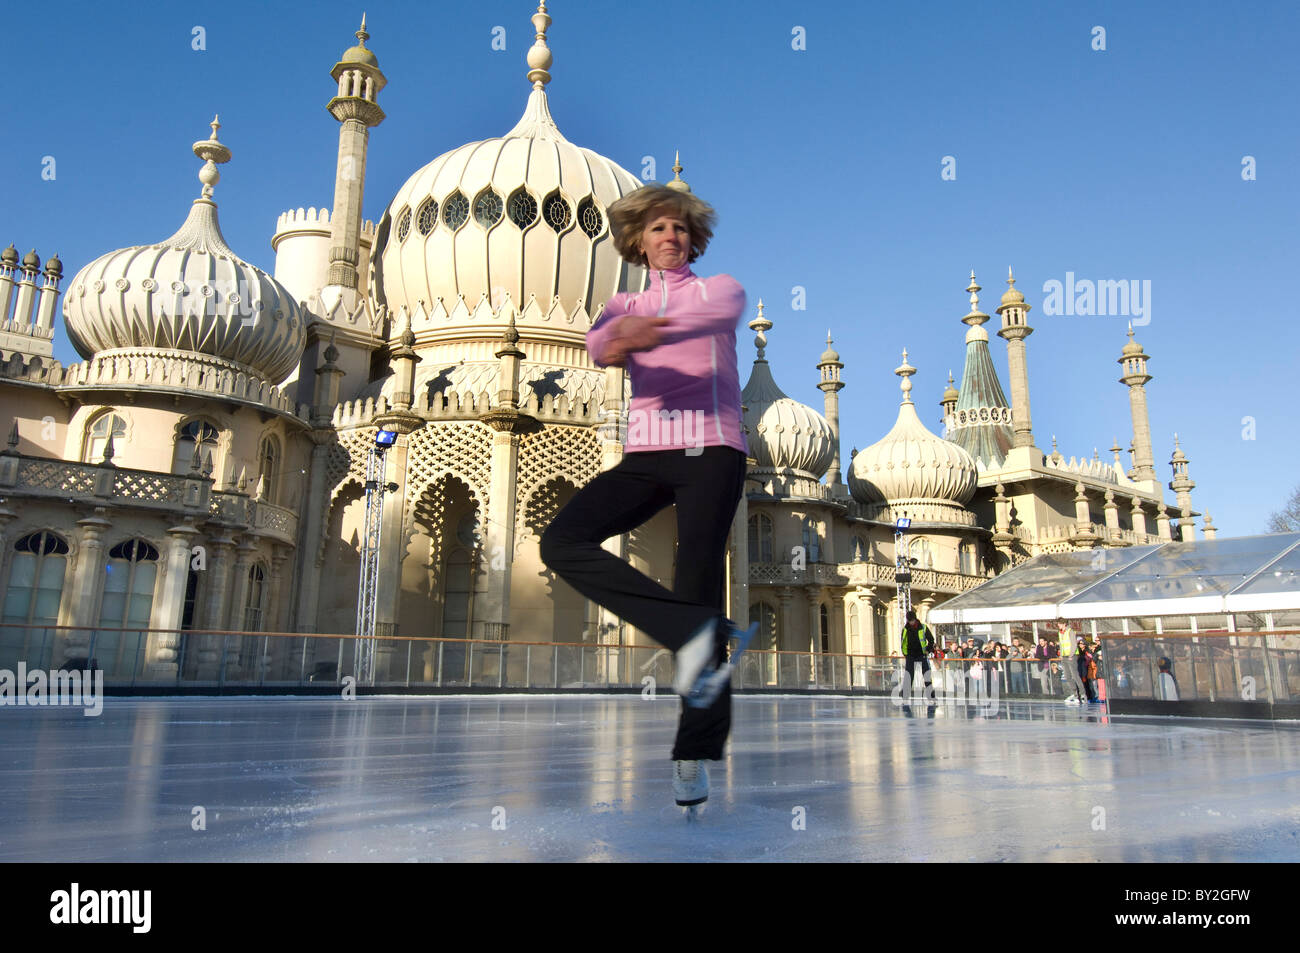 A woman skater spins on the temporary pop-up ice skating rink in front of the Brighton Royal Pavilion. Stock Photo